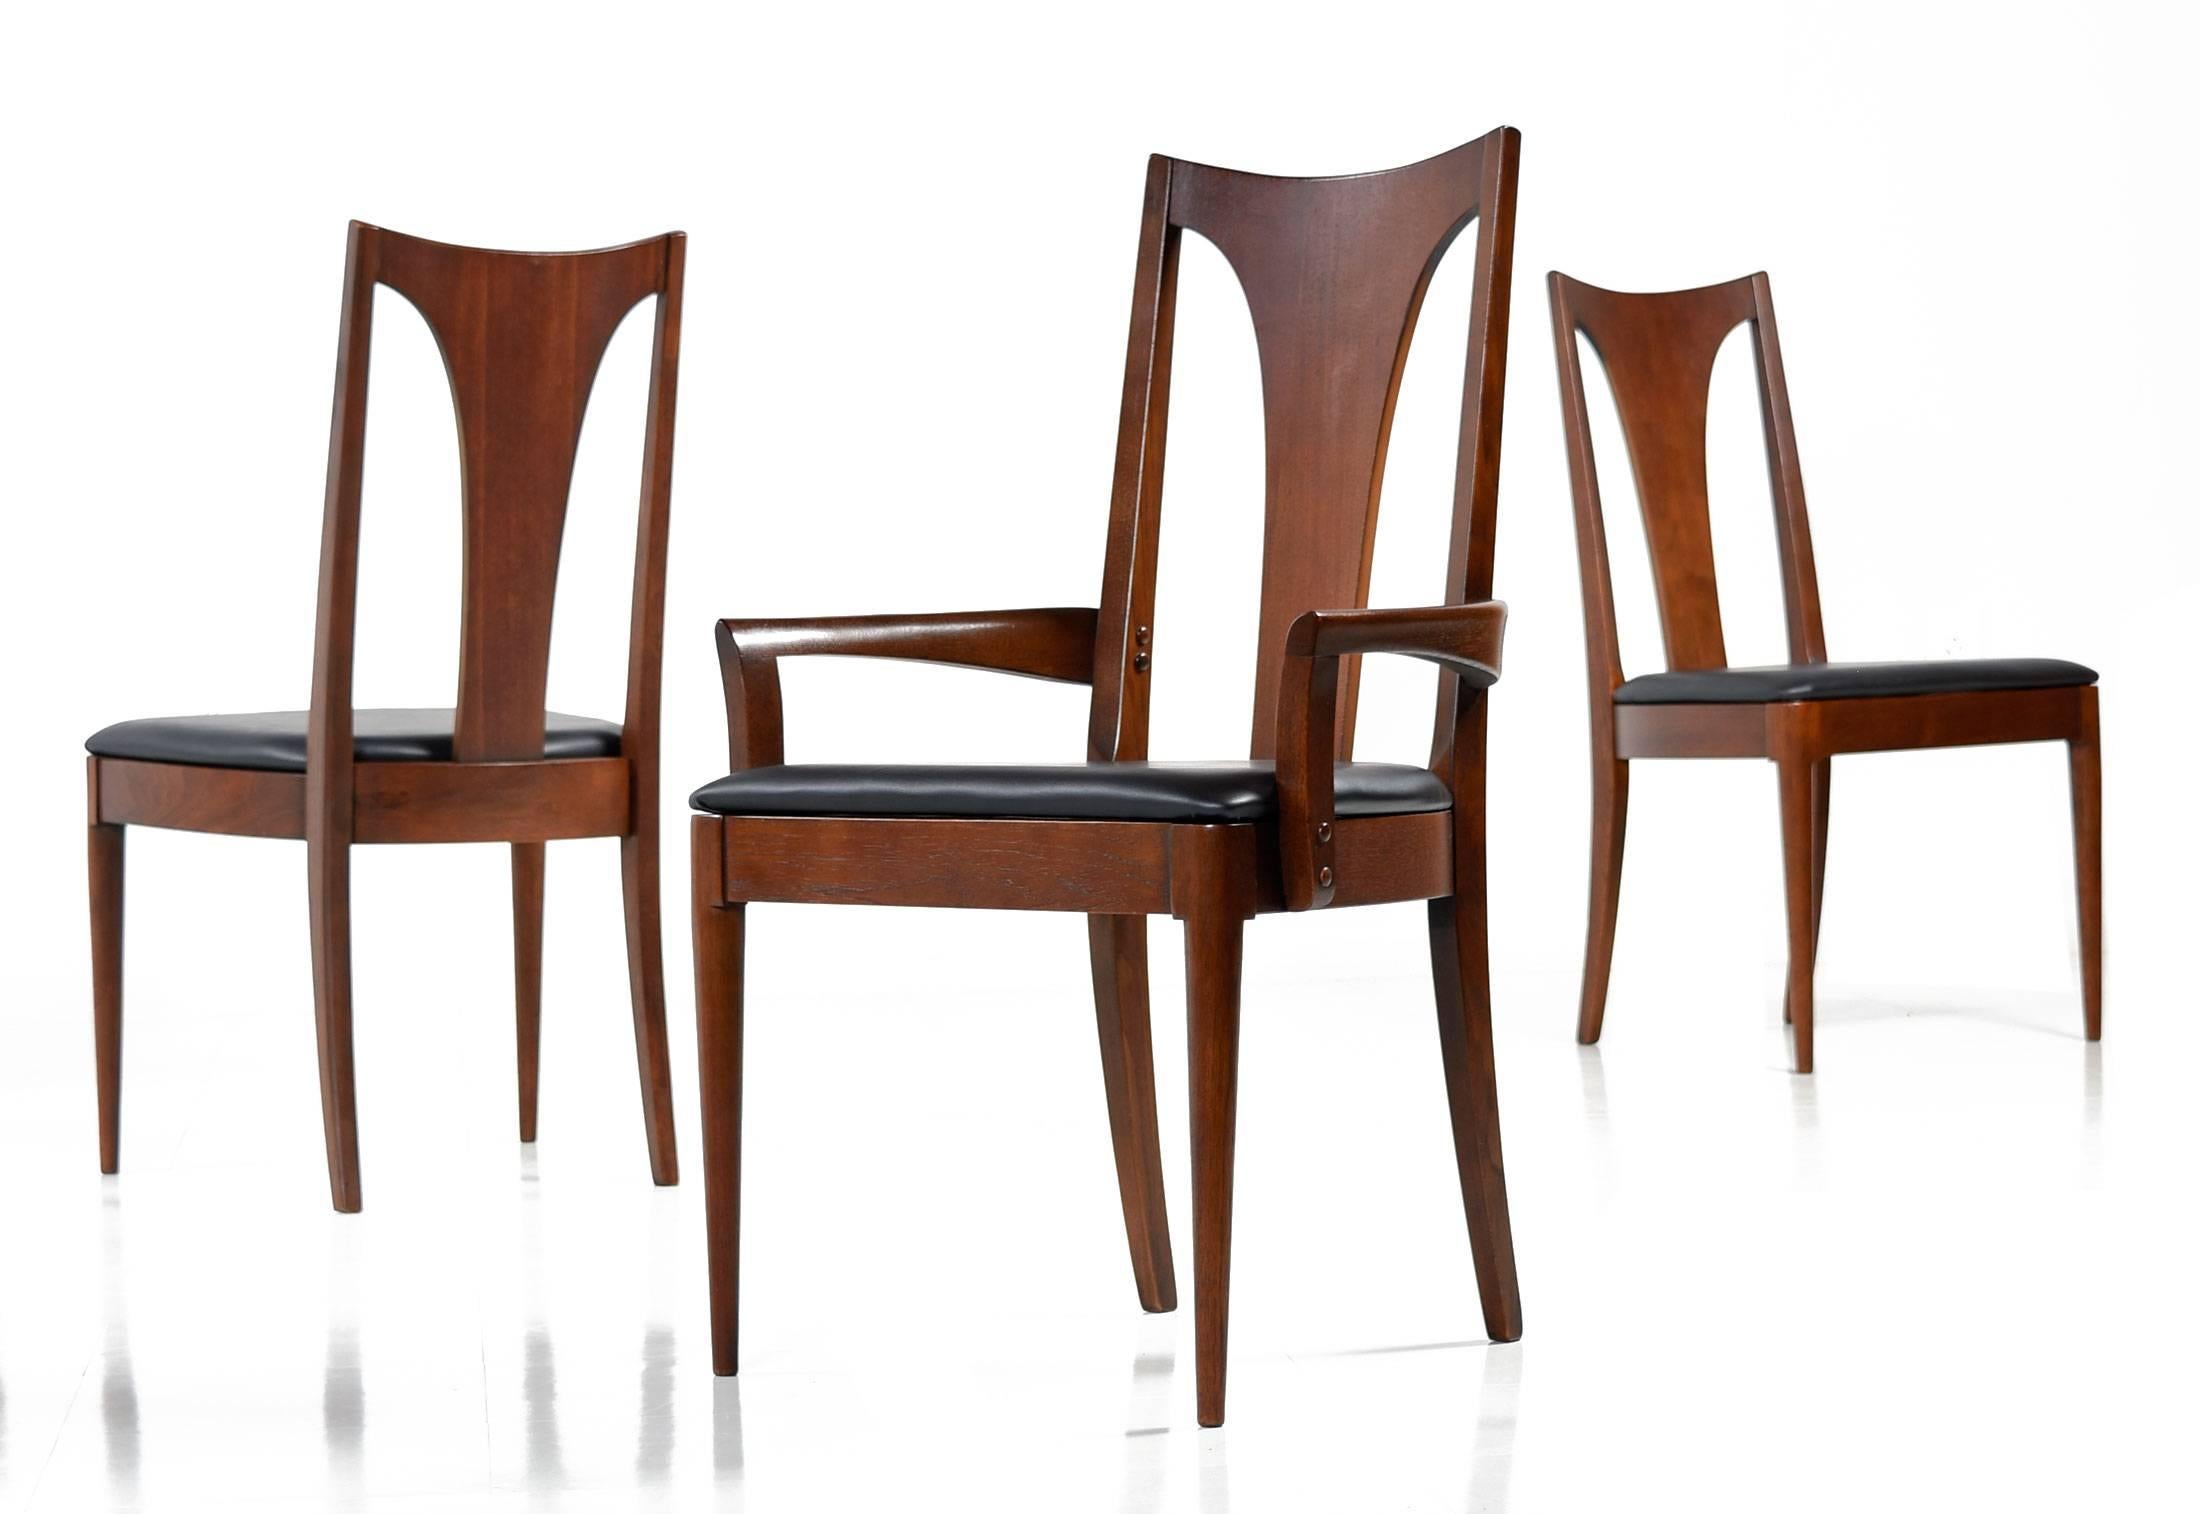 Set of eight Mid-Century modern dining chairs from Boyhill's Saga collection. This set includes seven armless side chairs and one captain's chair with arms. Each chair has been restored with new black vinyl upholstery on the seats, the frames have